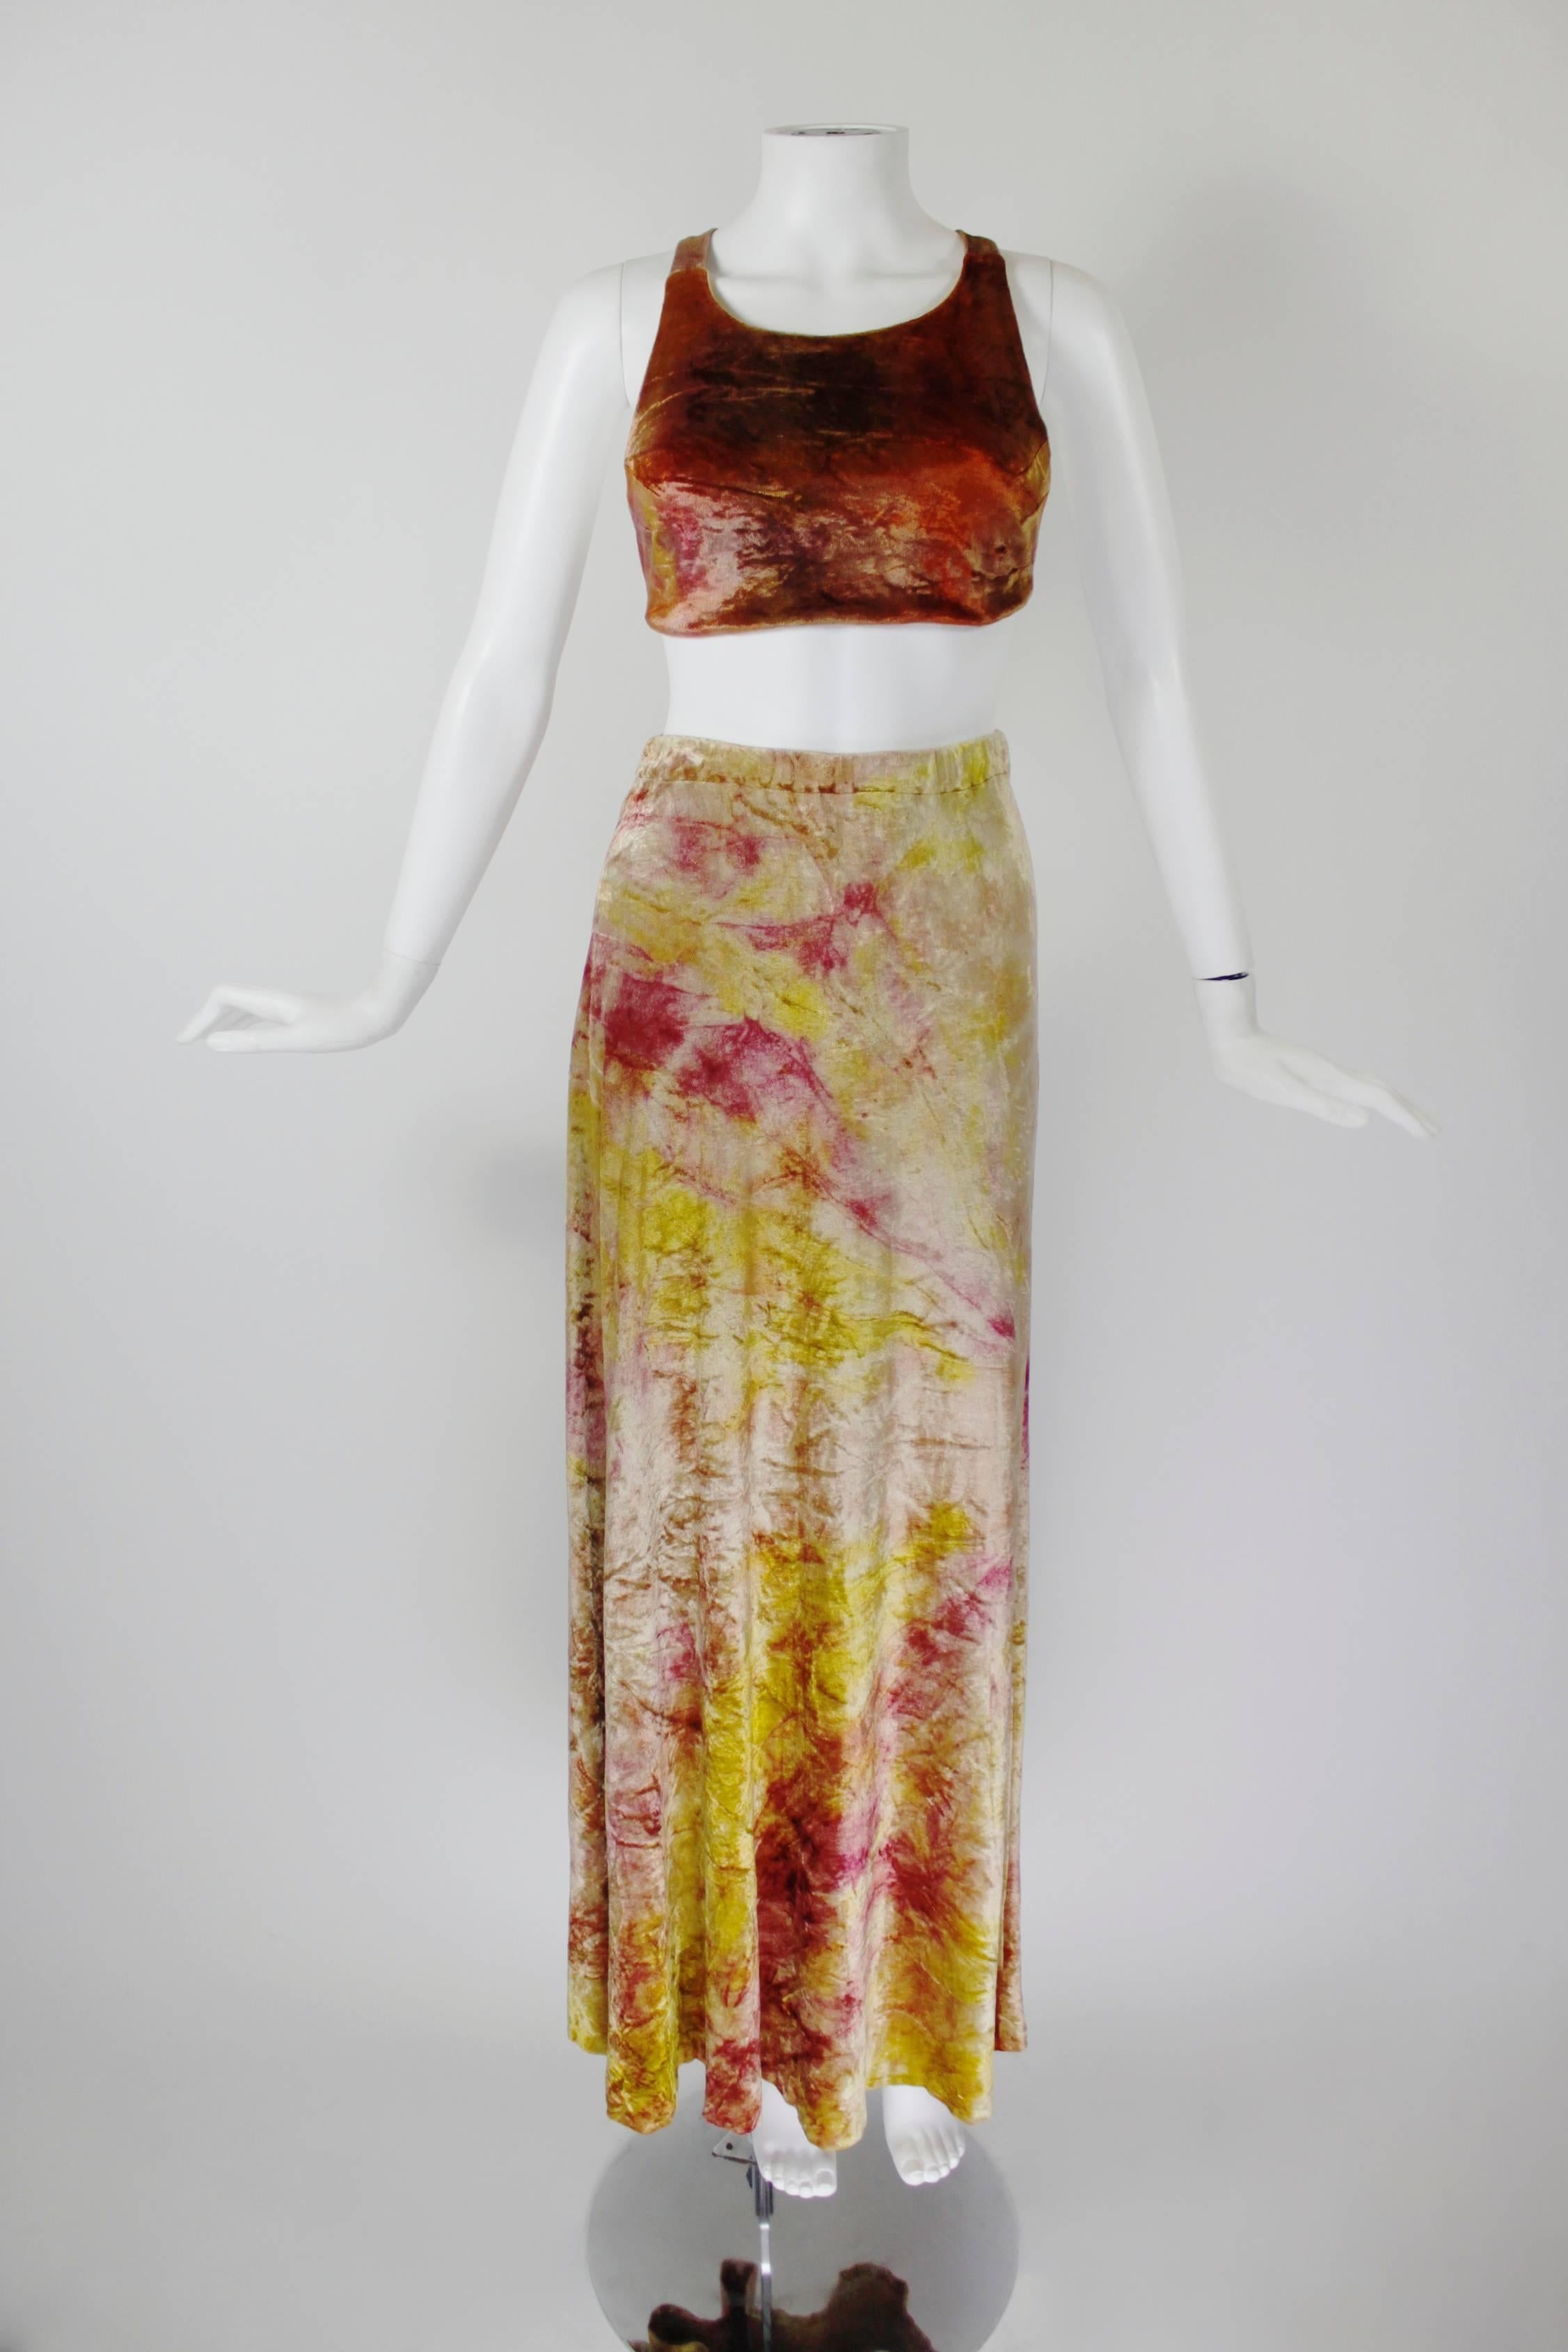 Renowned for its iconic boho pieces, this ensemble is a wonderful example of the gorgeous work Holly's Harp produced. A criss-cross back crop top and matching slightly flared maxi skirt are done in orange, red, yellow, and blush tie-dyed velvet.